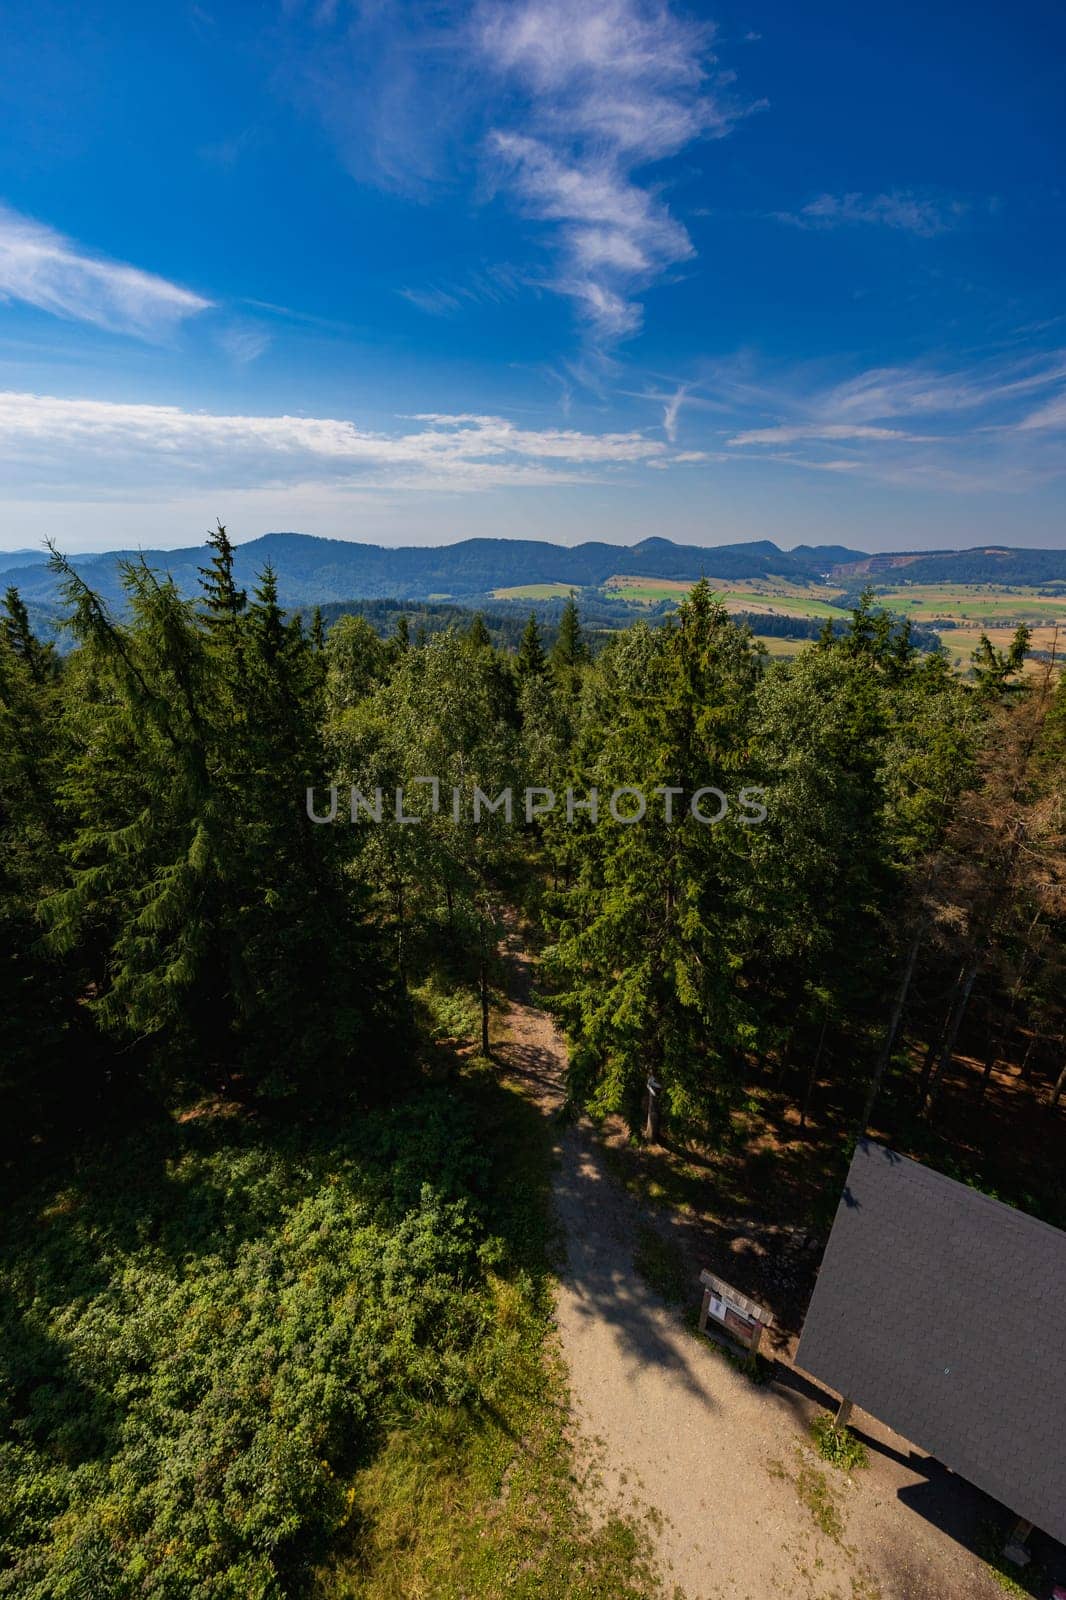 Beautiful green and blue panorama of layers of mountains and trees and some fields seen from top of viewing tower at highest mountain in this area